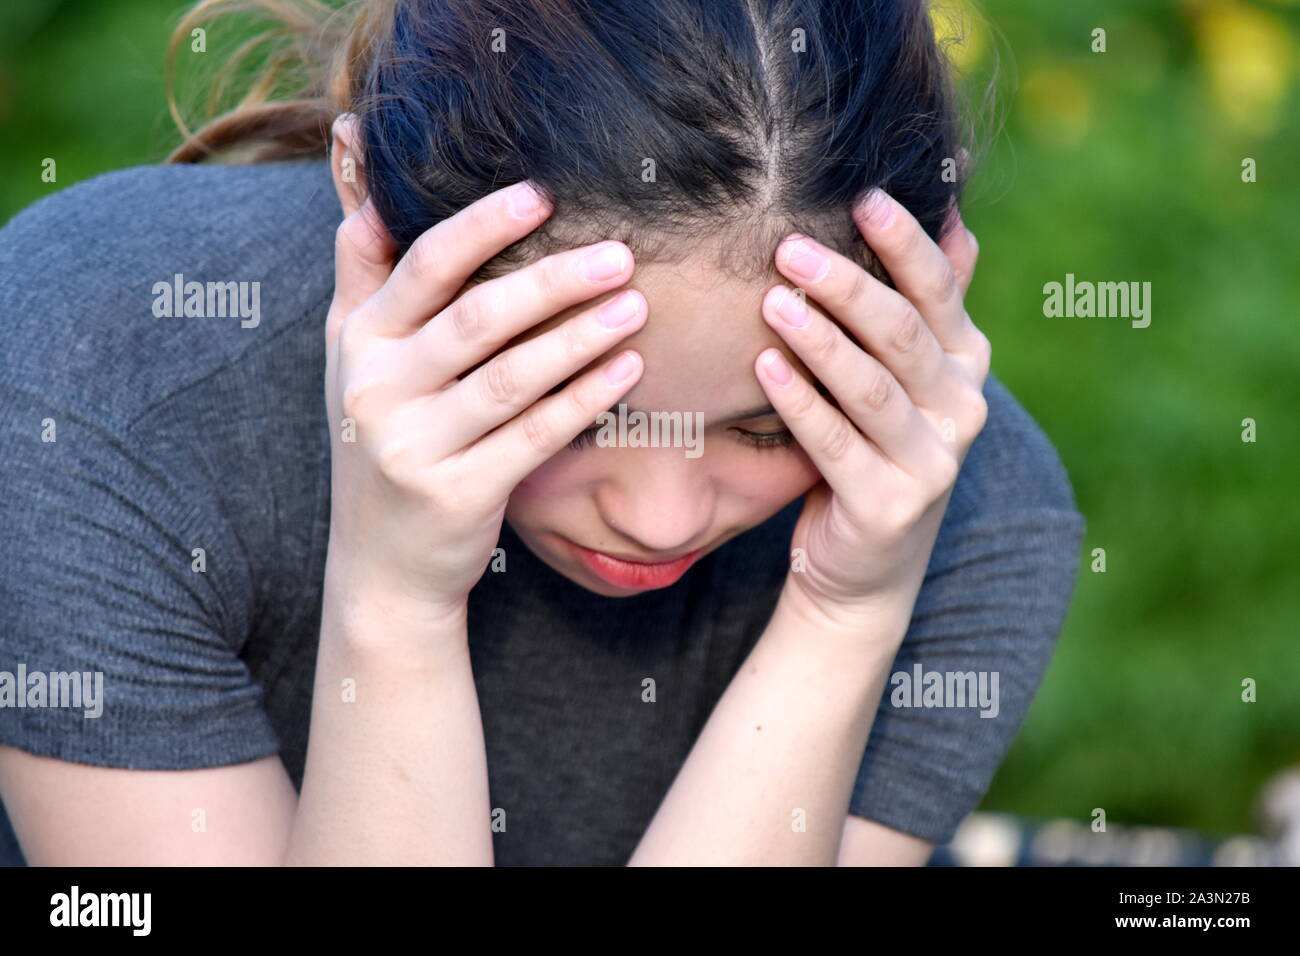 Worried Young Minority Female Woman Stock Photo